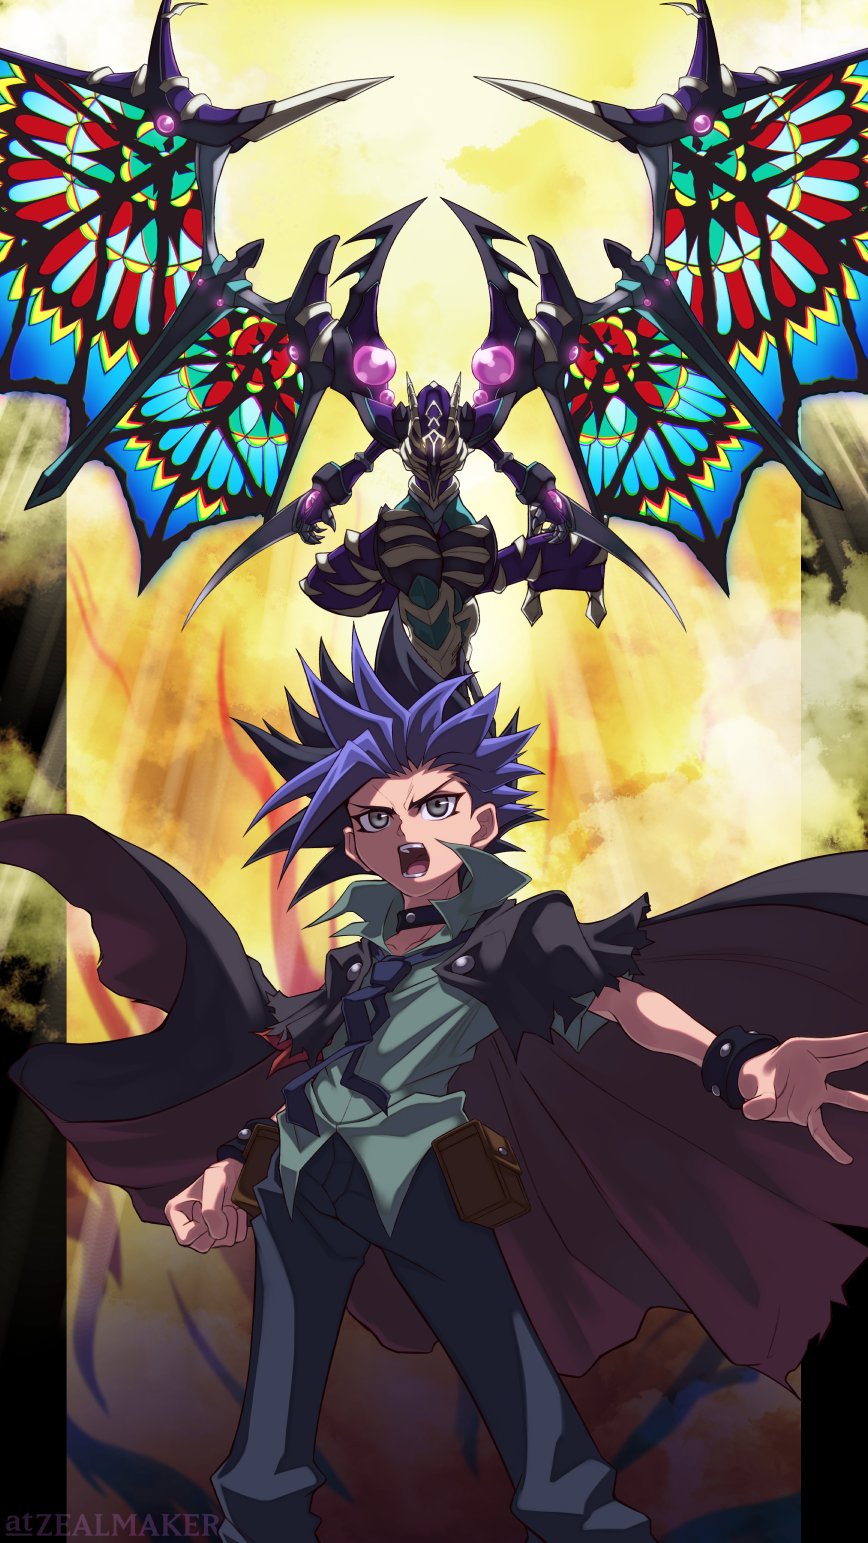 1boy black_cloak black_hair choker cloak cloud cloudy_sky collared_shirt dark_requiem_xyz_dragon duel_monster dyed_bangs feet_out_of_frame flying highres jacket light_rays loose_necktie male_focus multicolored_hair necktie orange_sky orb purple_hair serious shirt shouting sky spiked_hair spread_wings stained_glass standing torn_cloak torn_clothes two-tone_hair yu-gi-oh! yu-gi-oh!_arc-v yuuto_(yu-gi-oh!) zealmaker